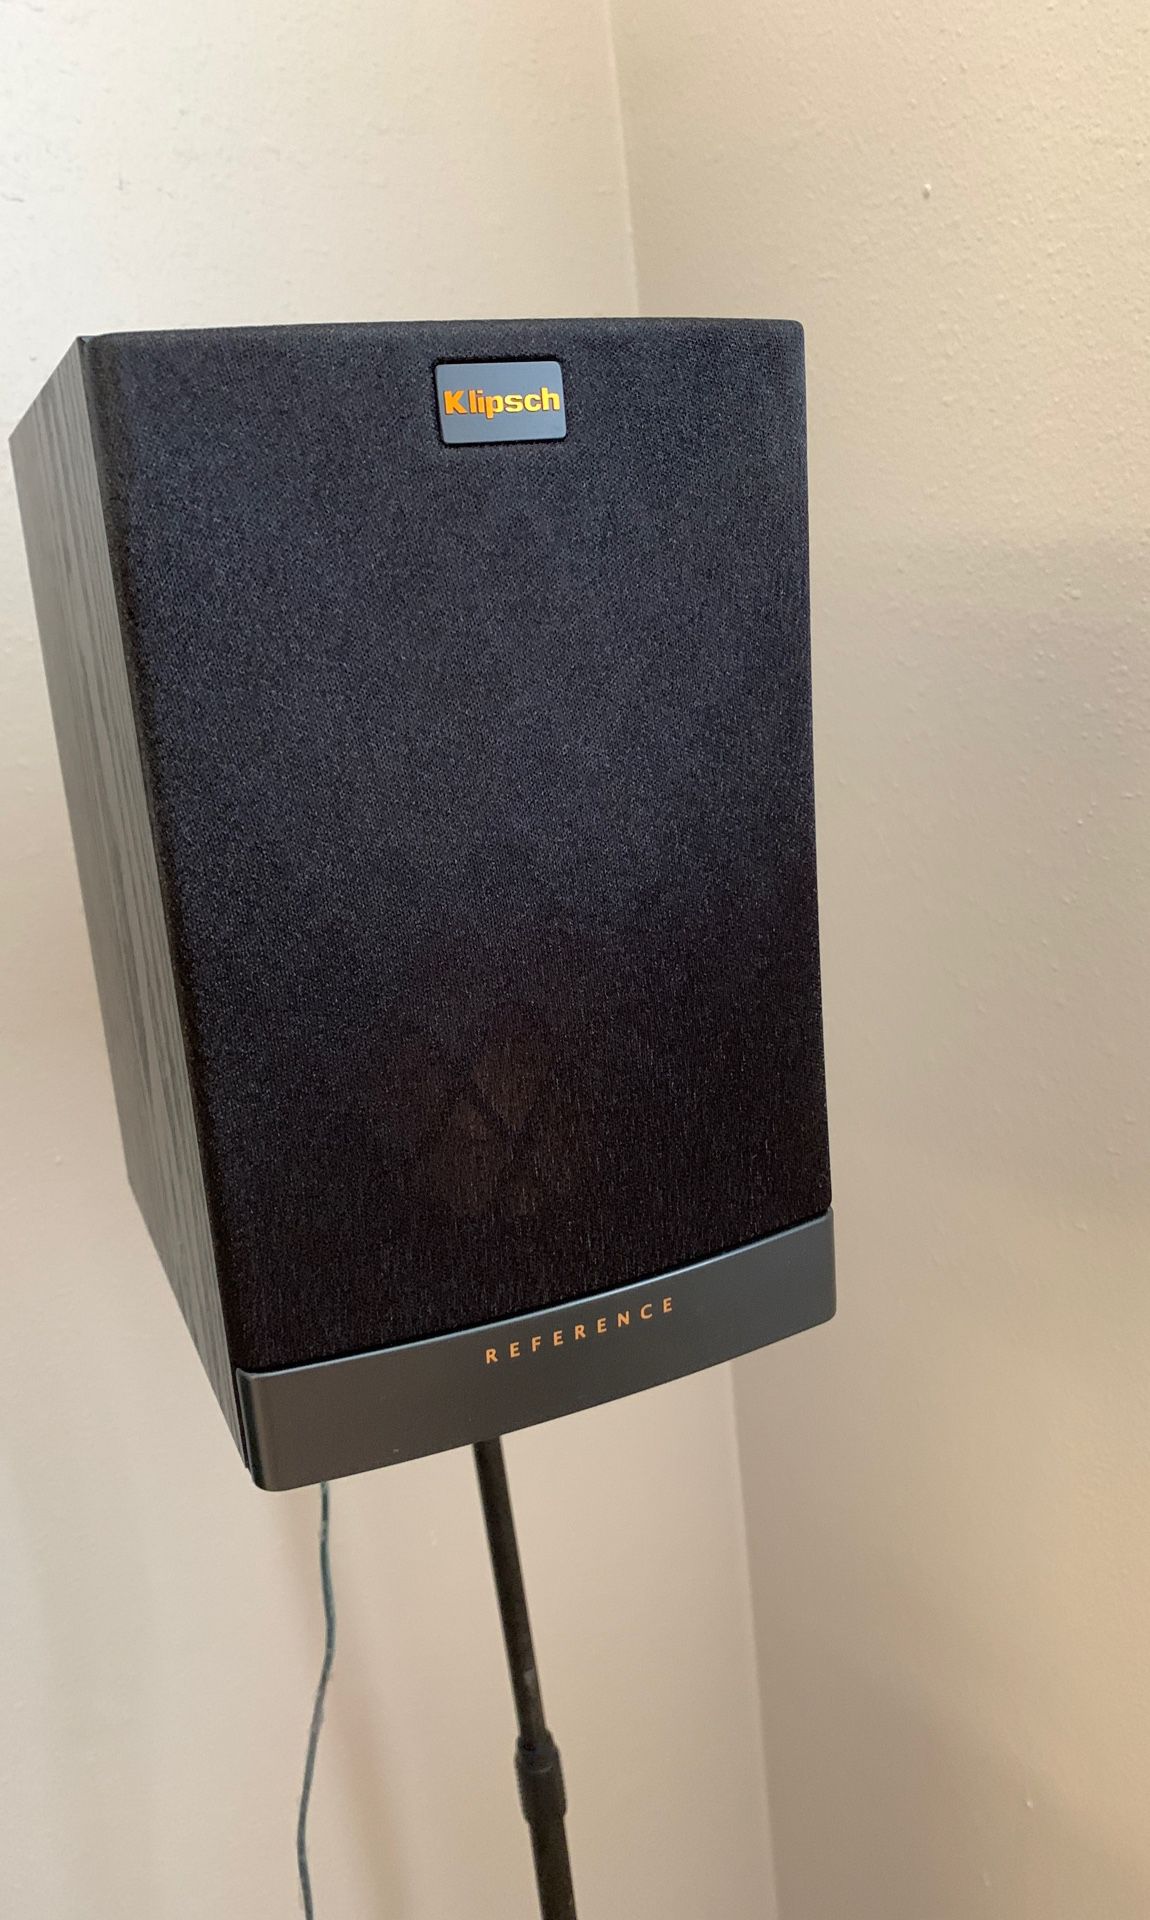 Klipsch Reference RB 10 with Sanus stands